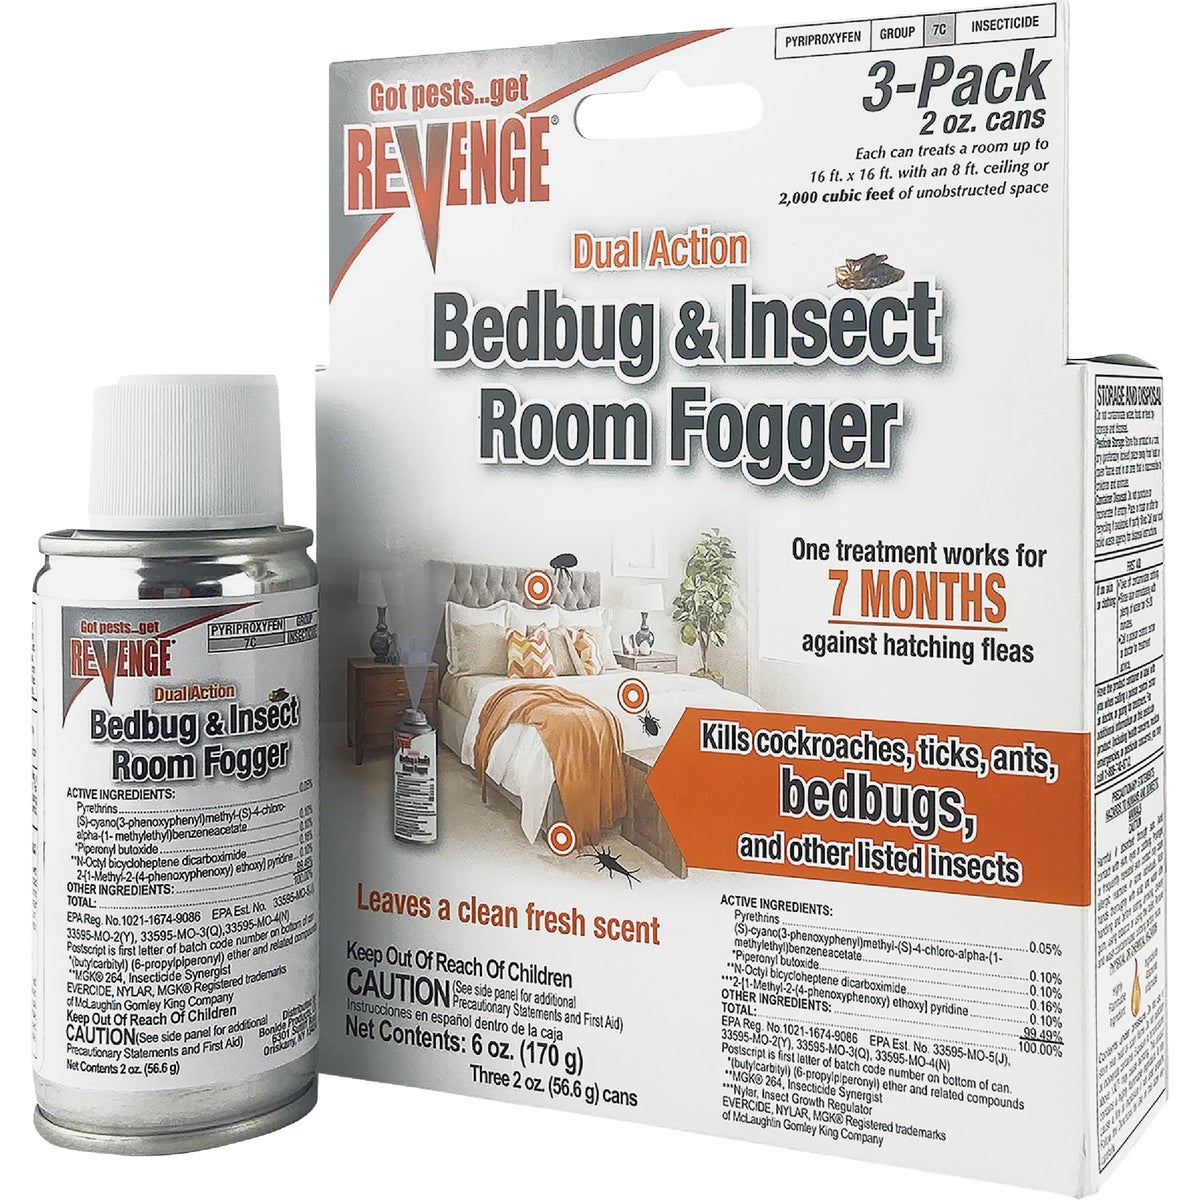 Item 705242, Indoor room fogger that provides effective long-term control of bedbugs and